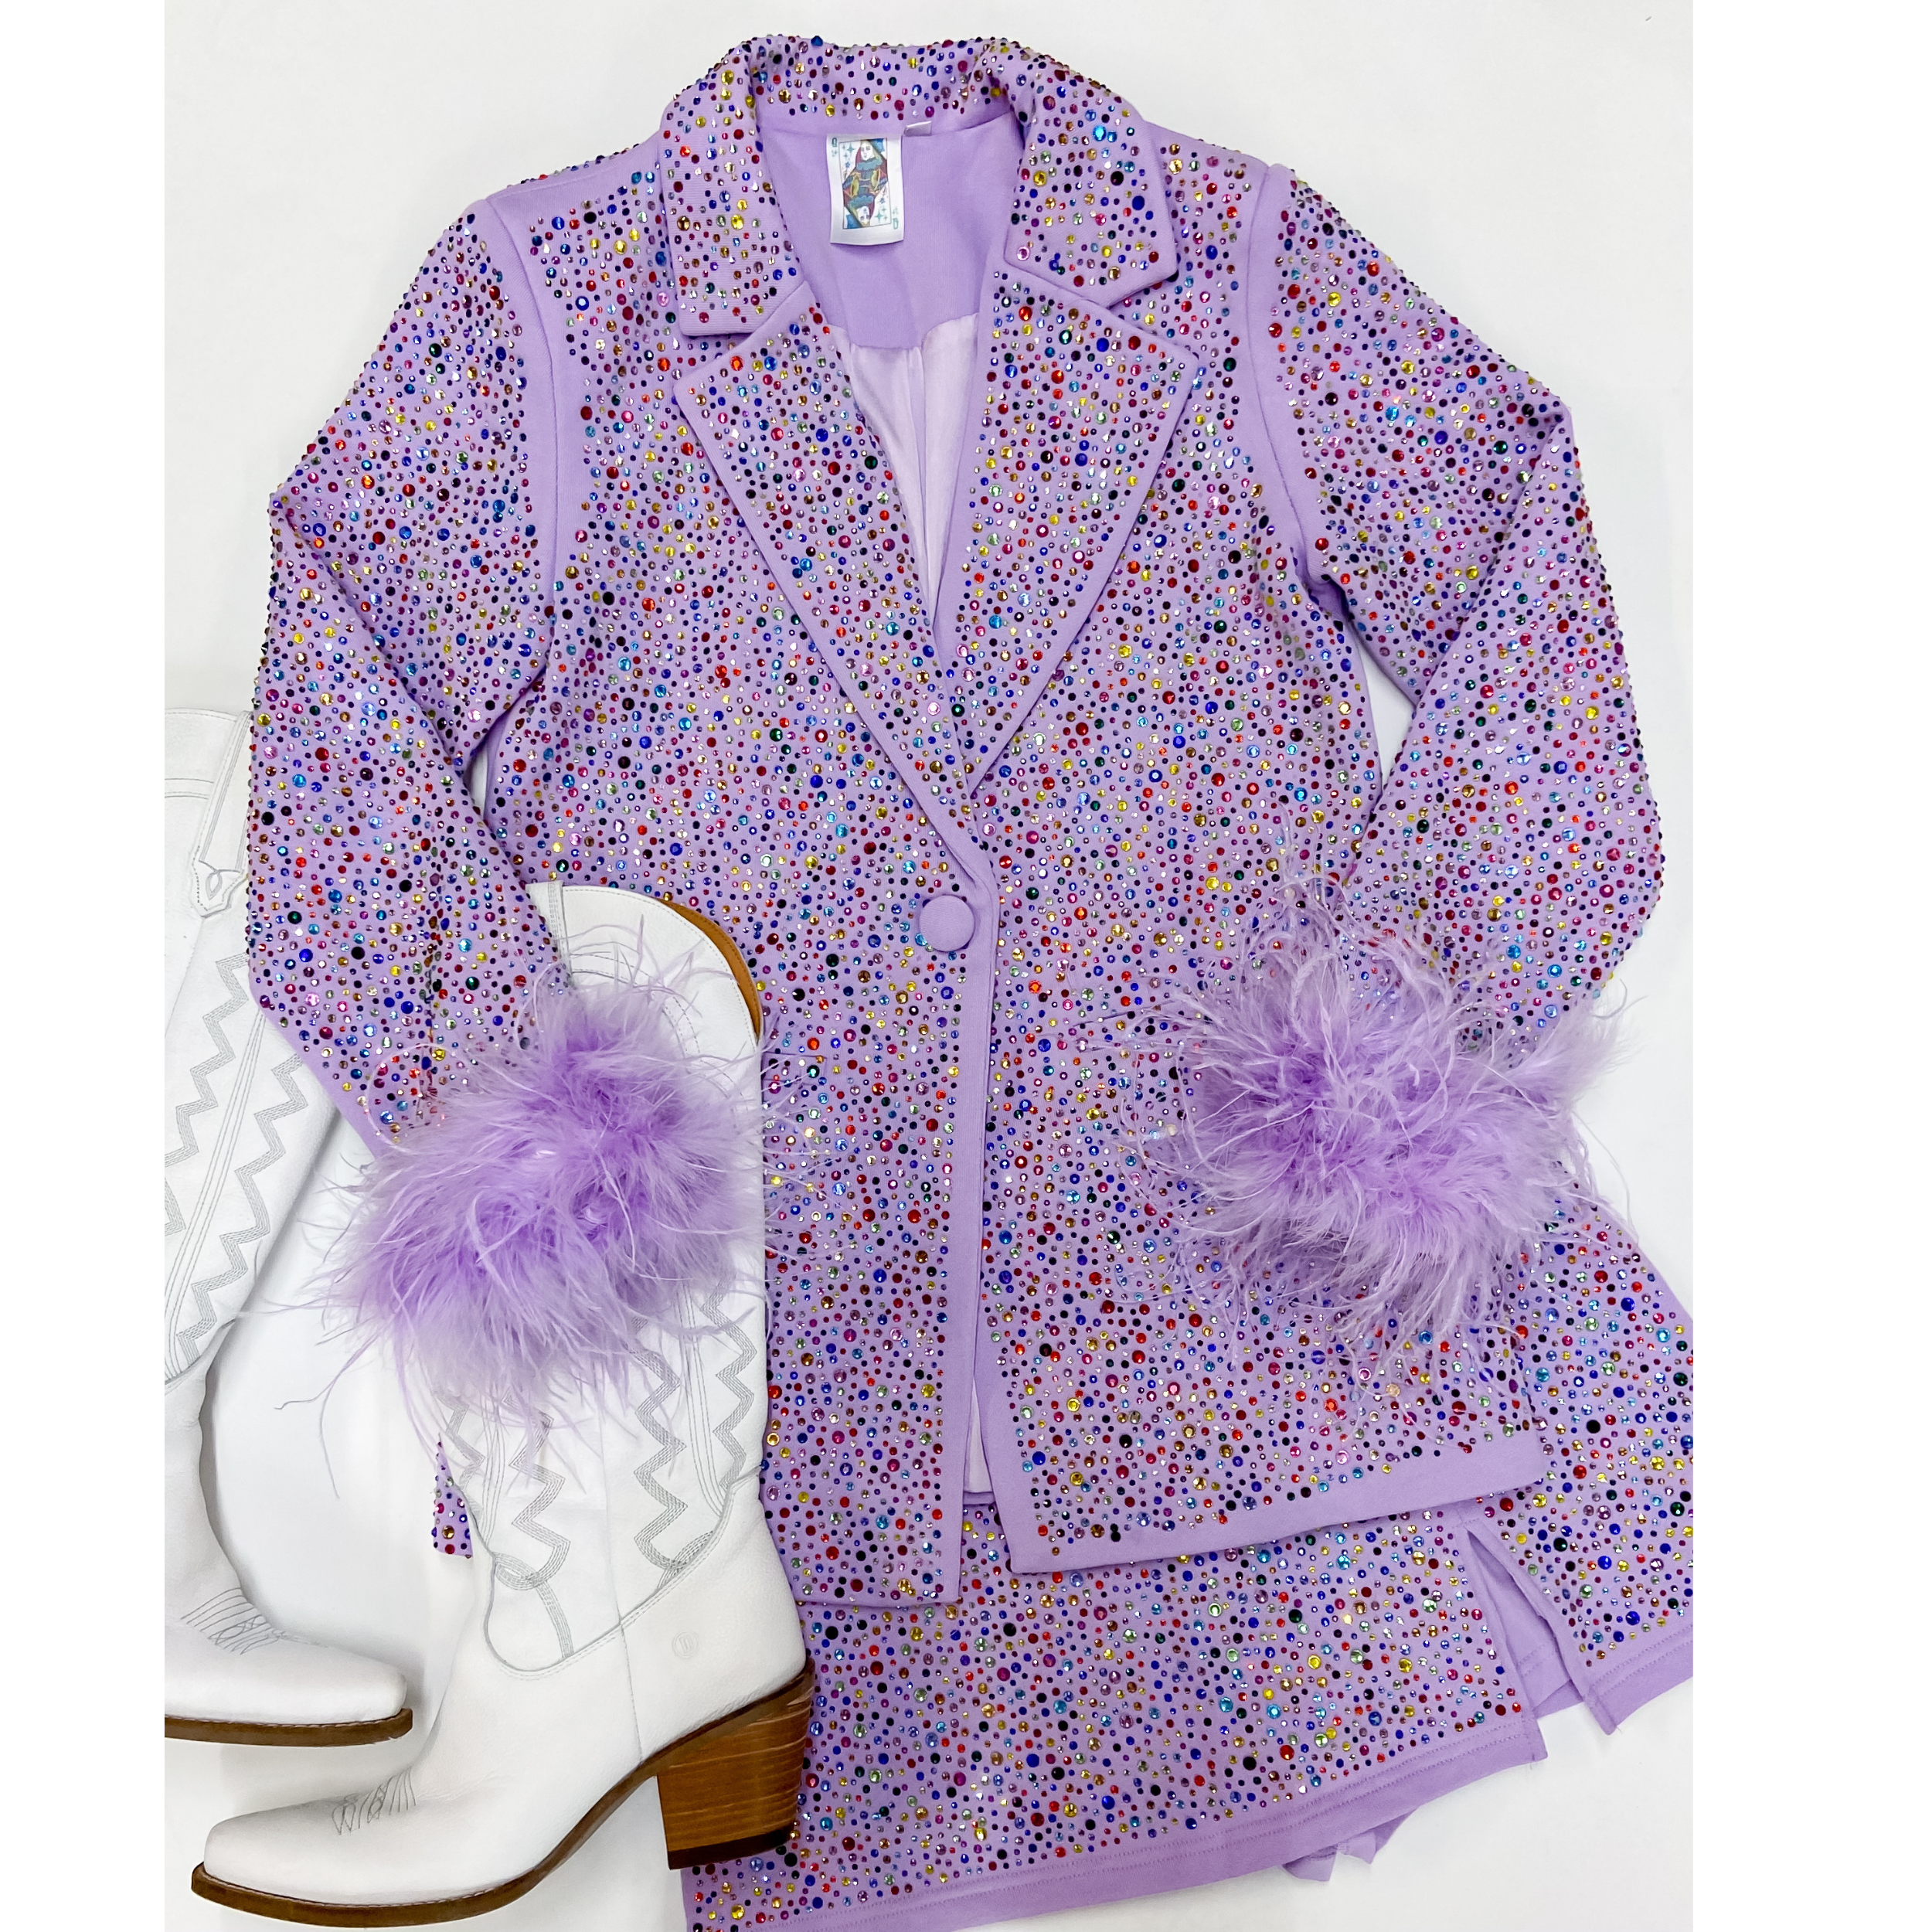 Photo features crystal studded lavender blazer with feathers cuffs around the wrists. This balzer is pictures on an all white background with white boots.  